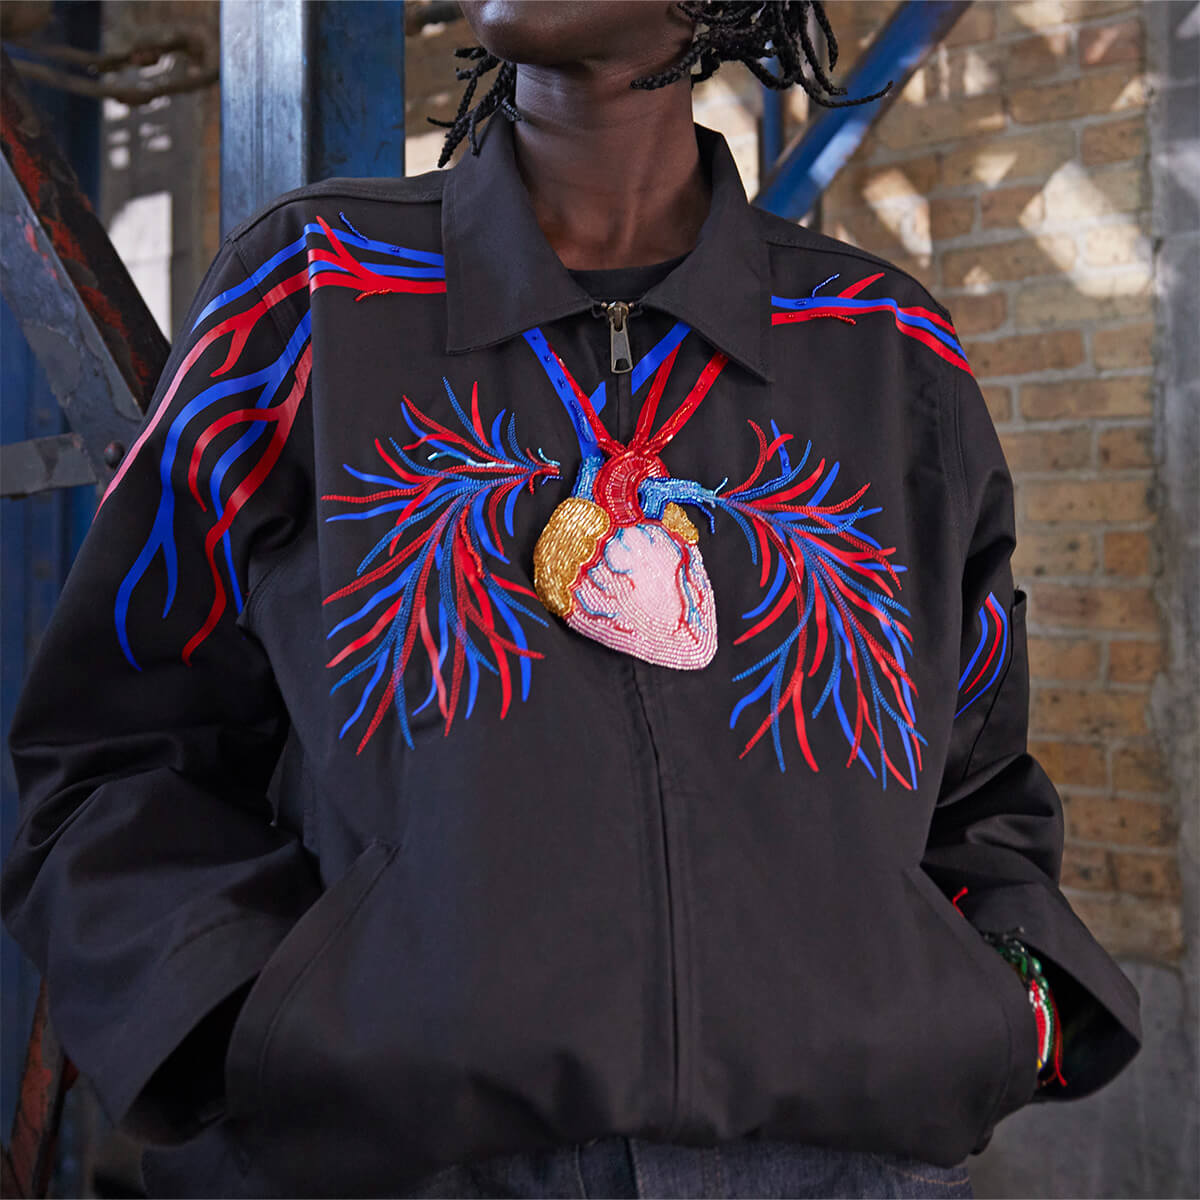 An eisenhower jacket altered with a painting of a heart and veins on it worn on a model.